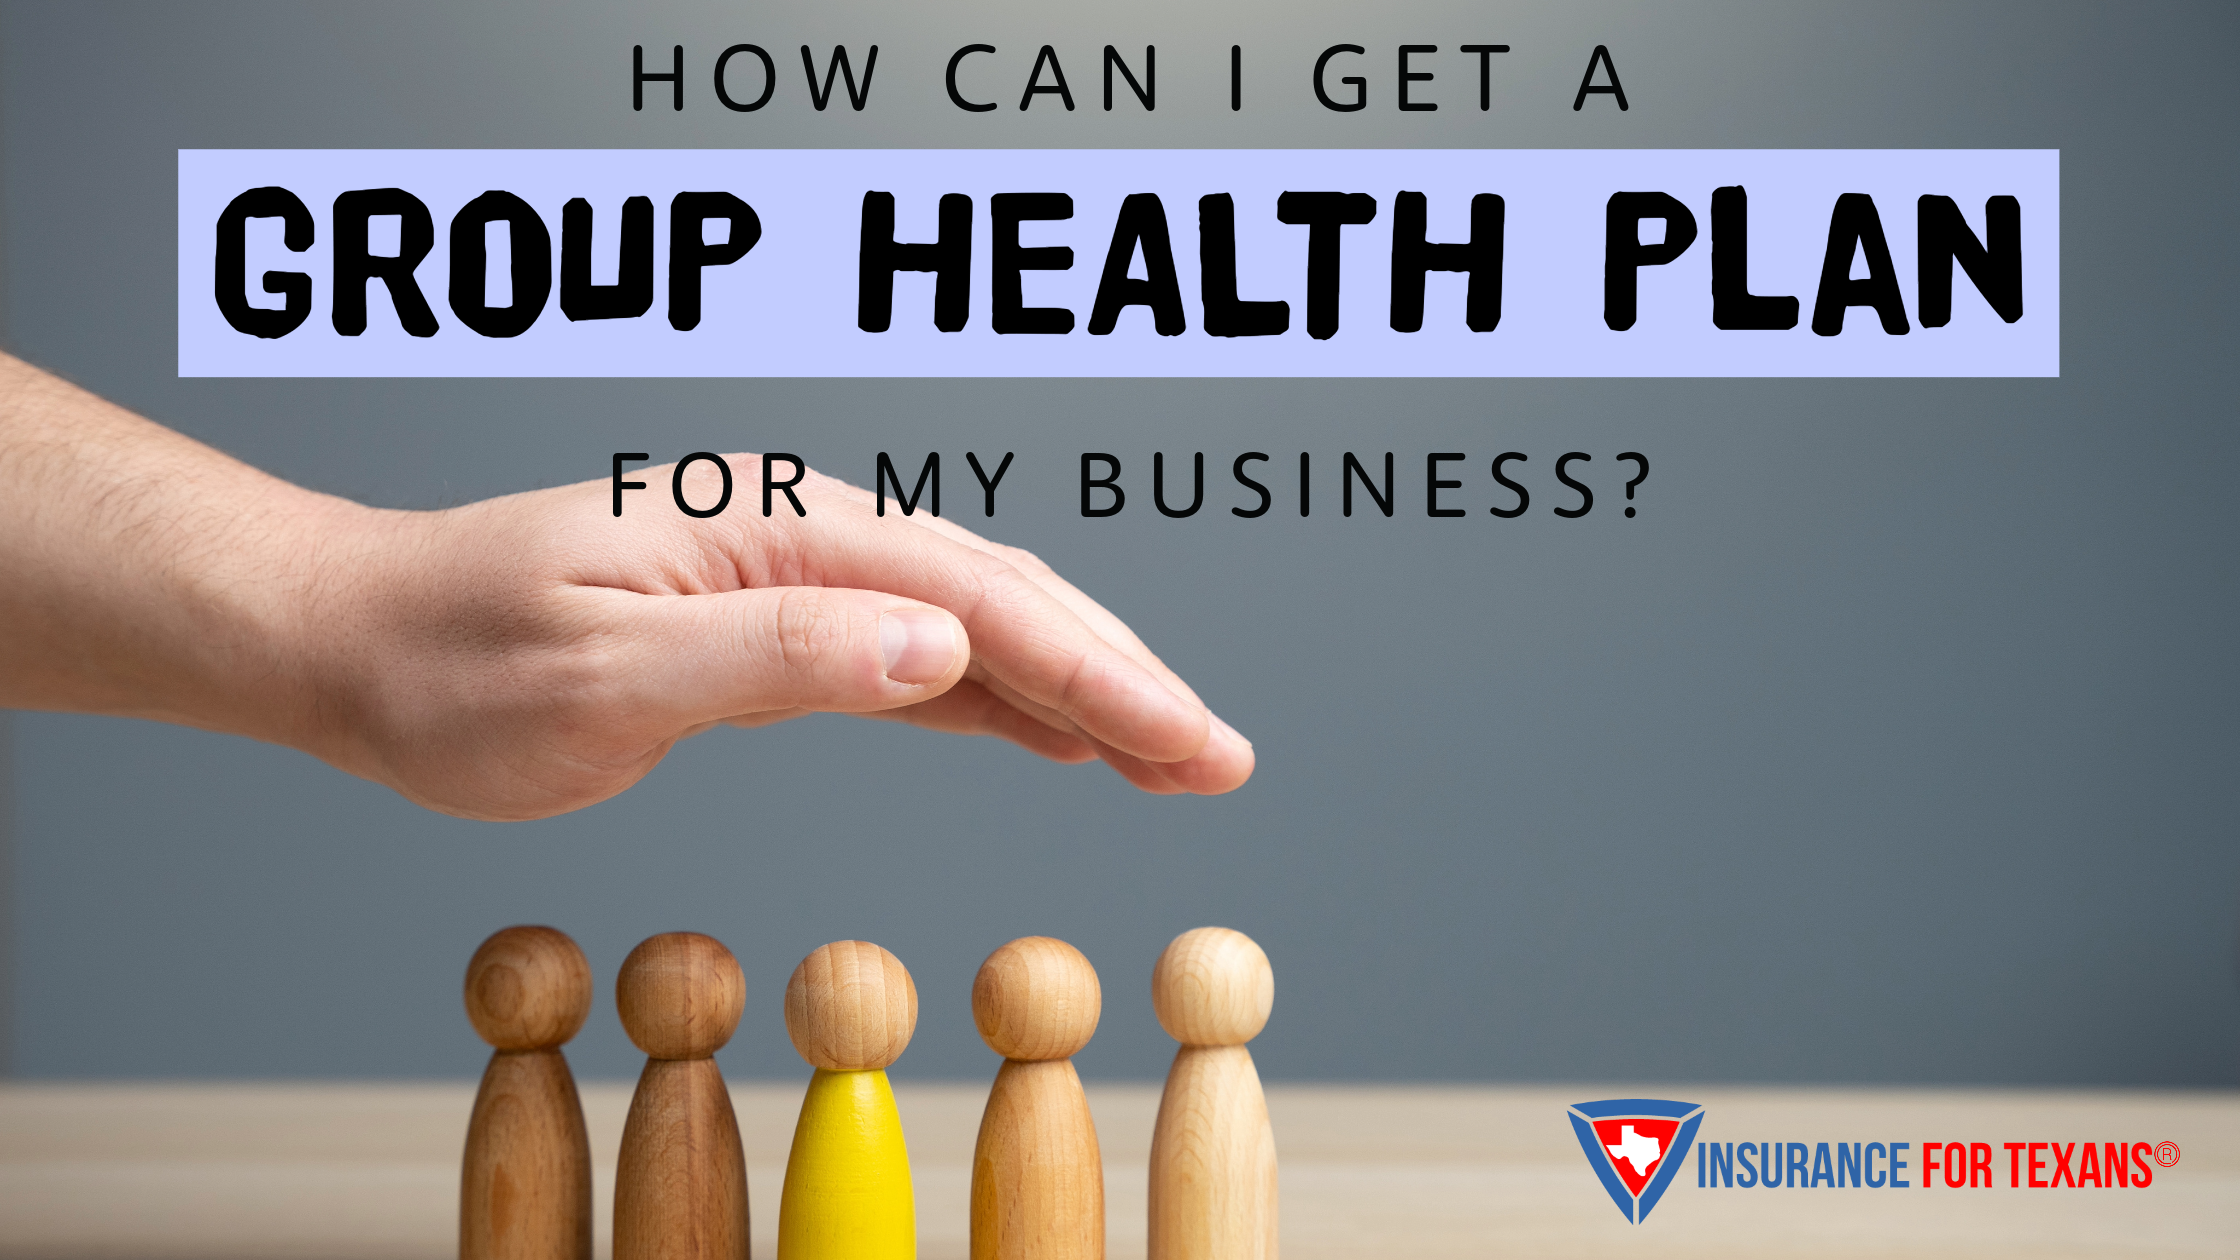 How Can I Get A Group Health Plan For My Business?